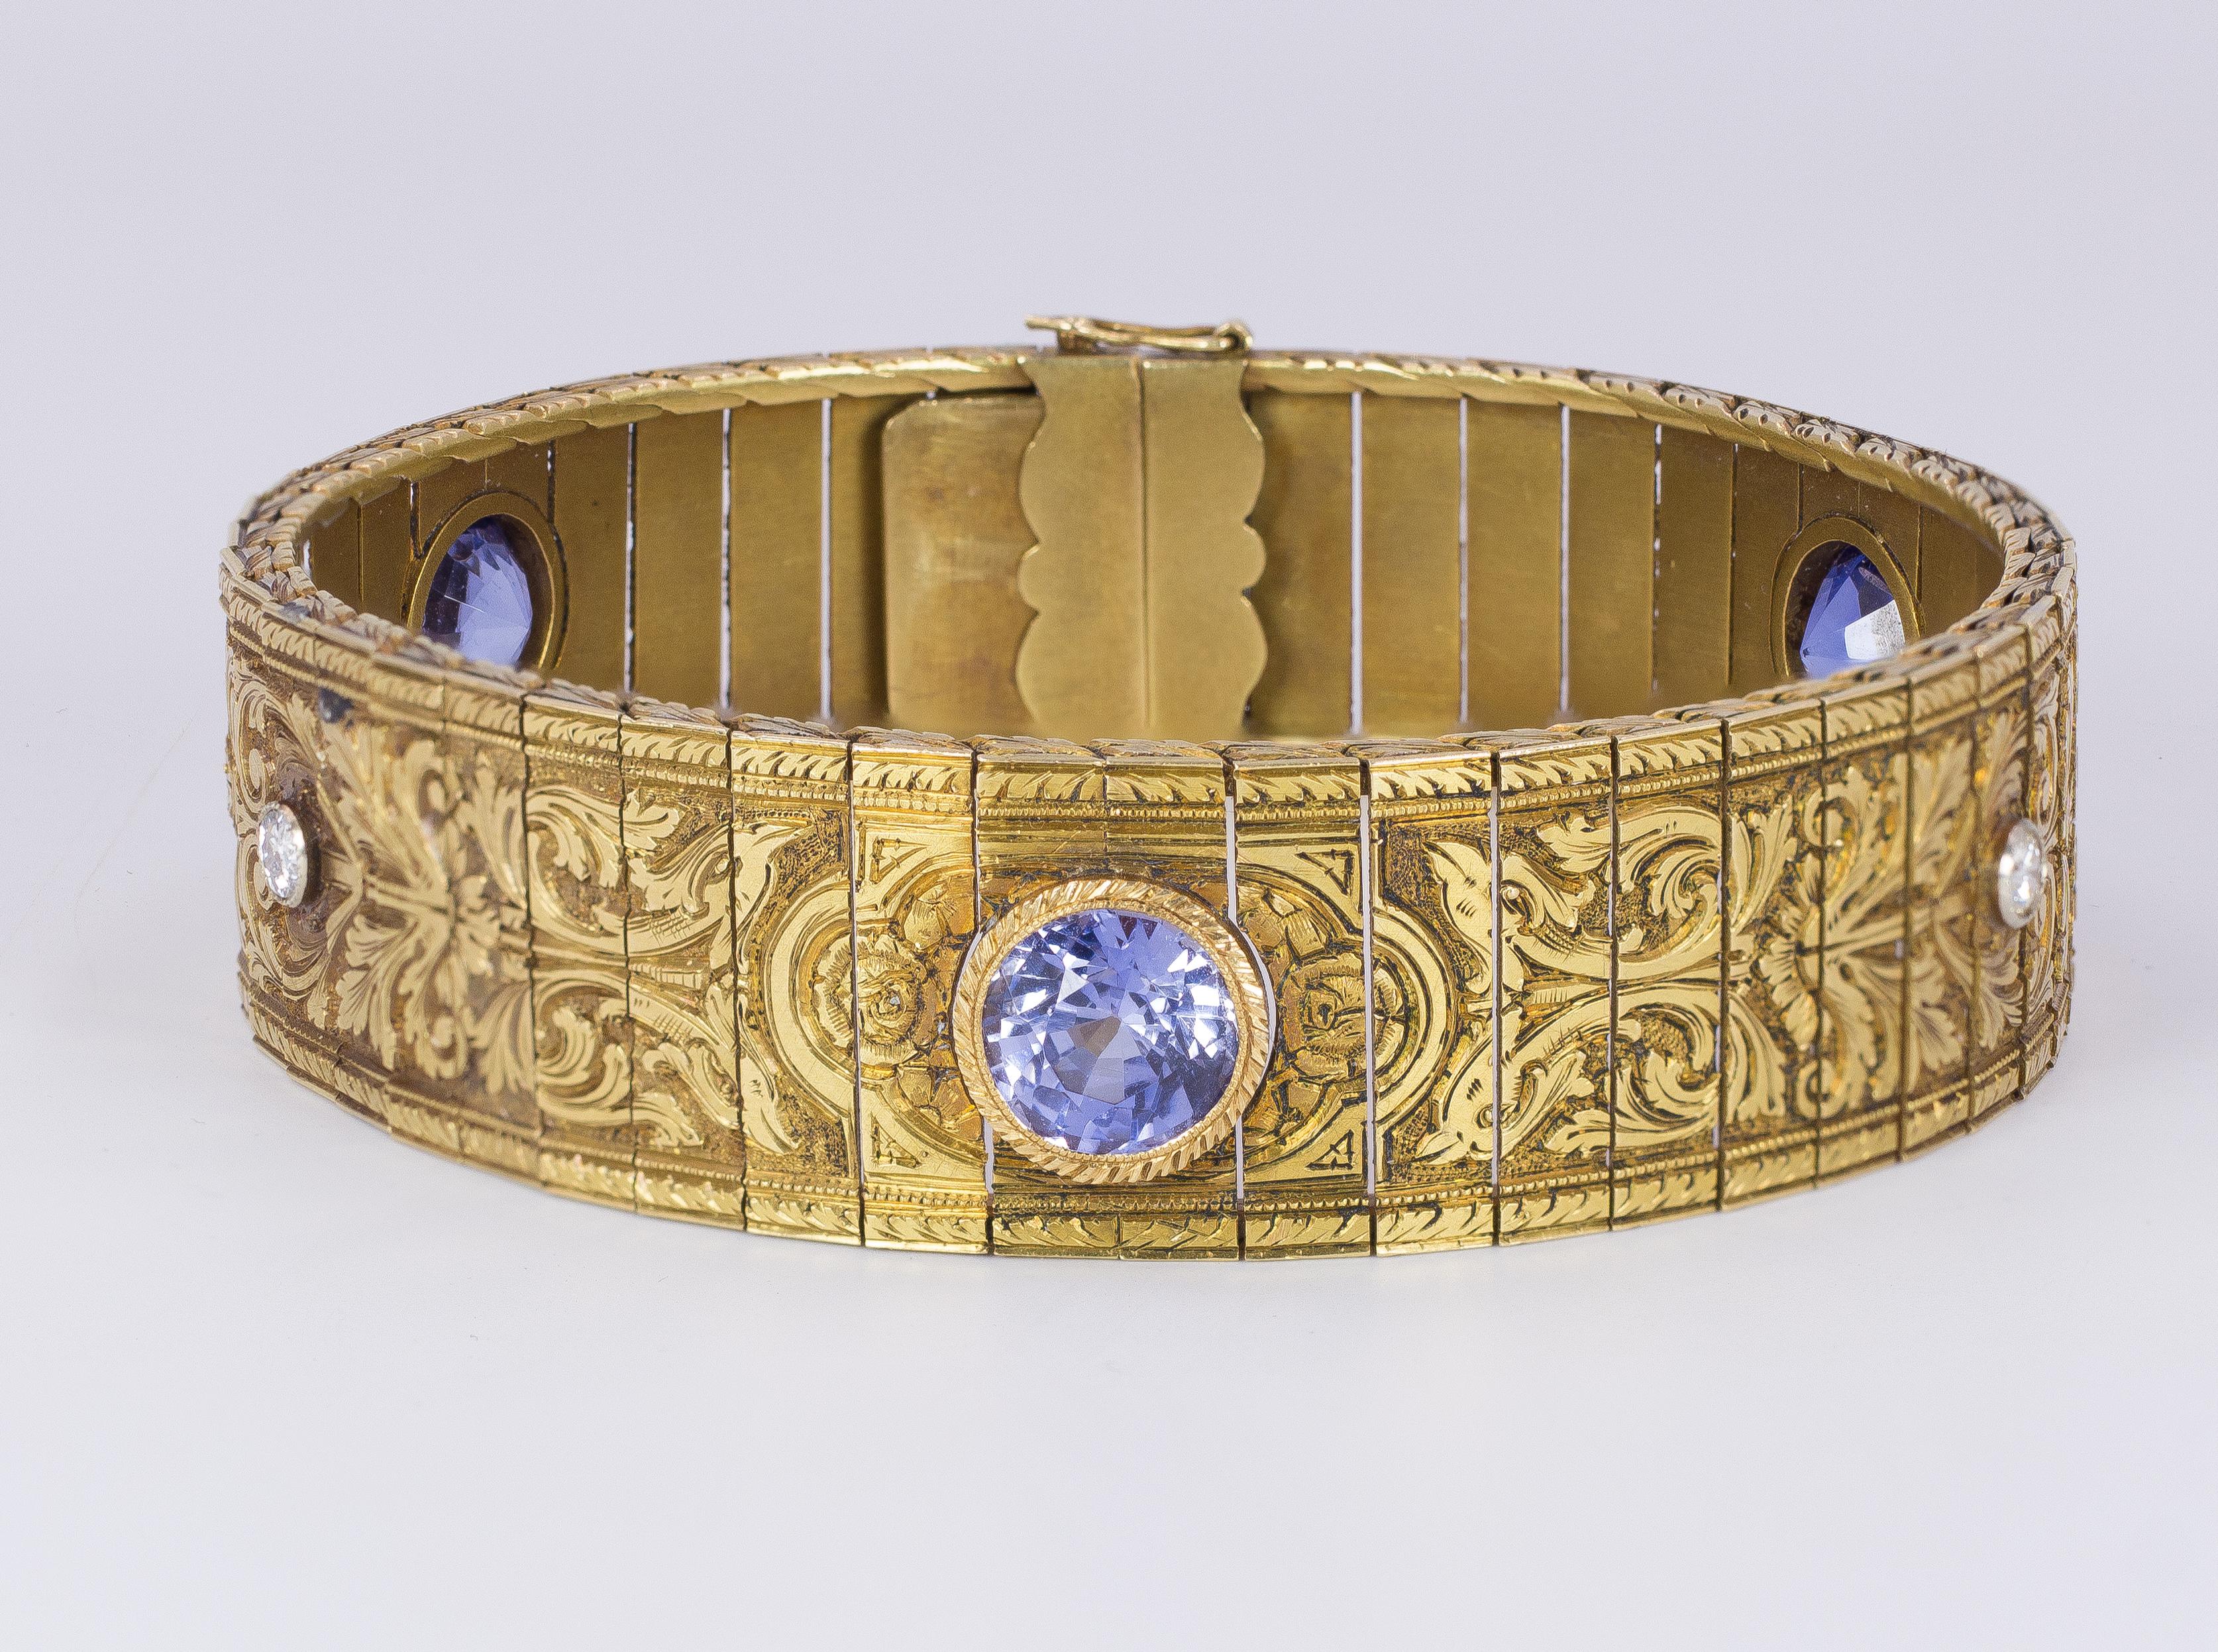 Women's Antique 18 Karat Gold, Sapphire and Diamond Cuff Bangle, Early 20th Century For Sale